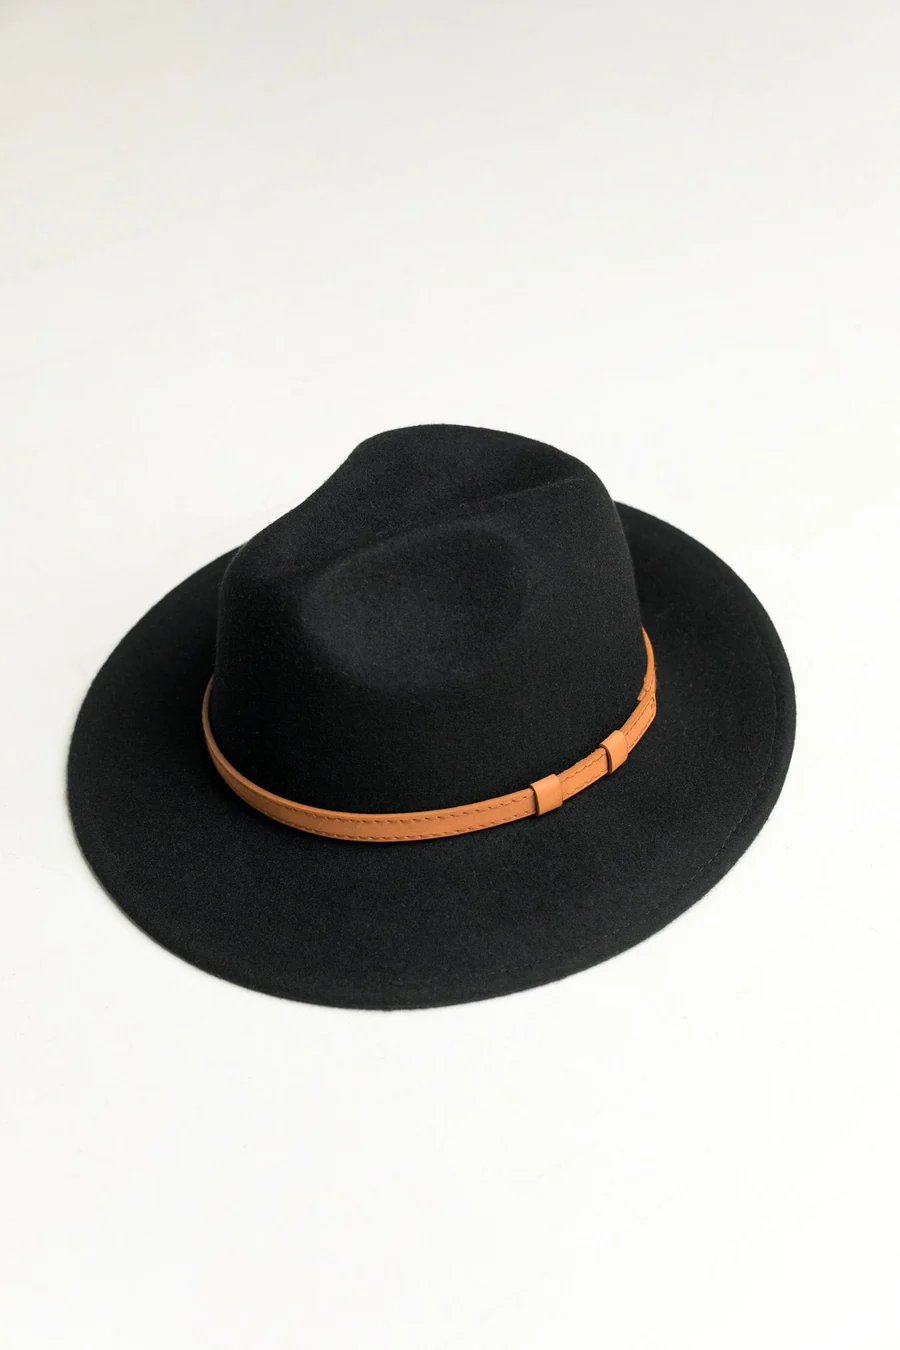 Empire hat in black. A great boho style hat.